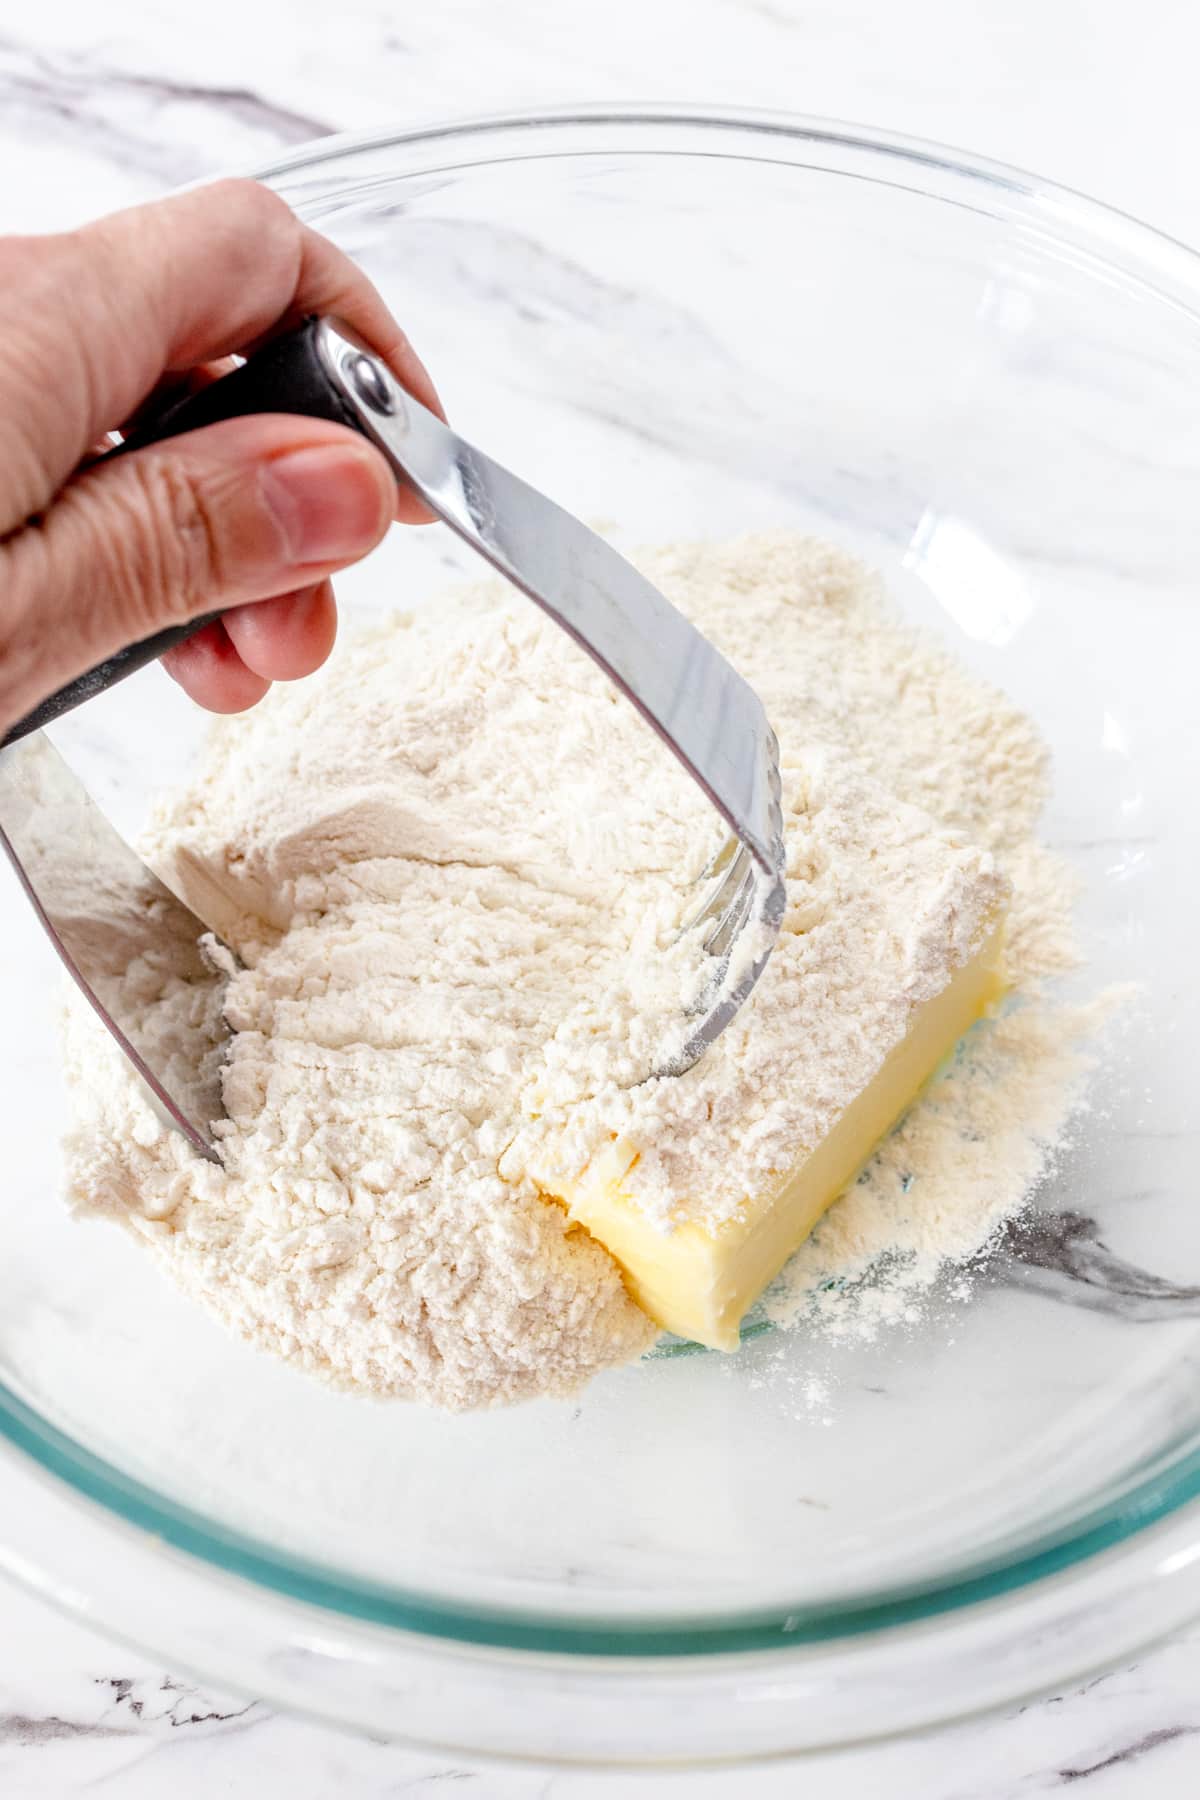 Close up of a hand blending butter and all-purpose flour in a mixing bowl with a pastry blender.